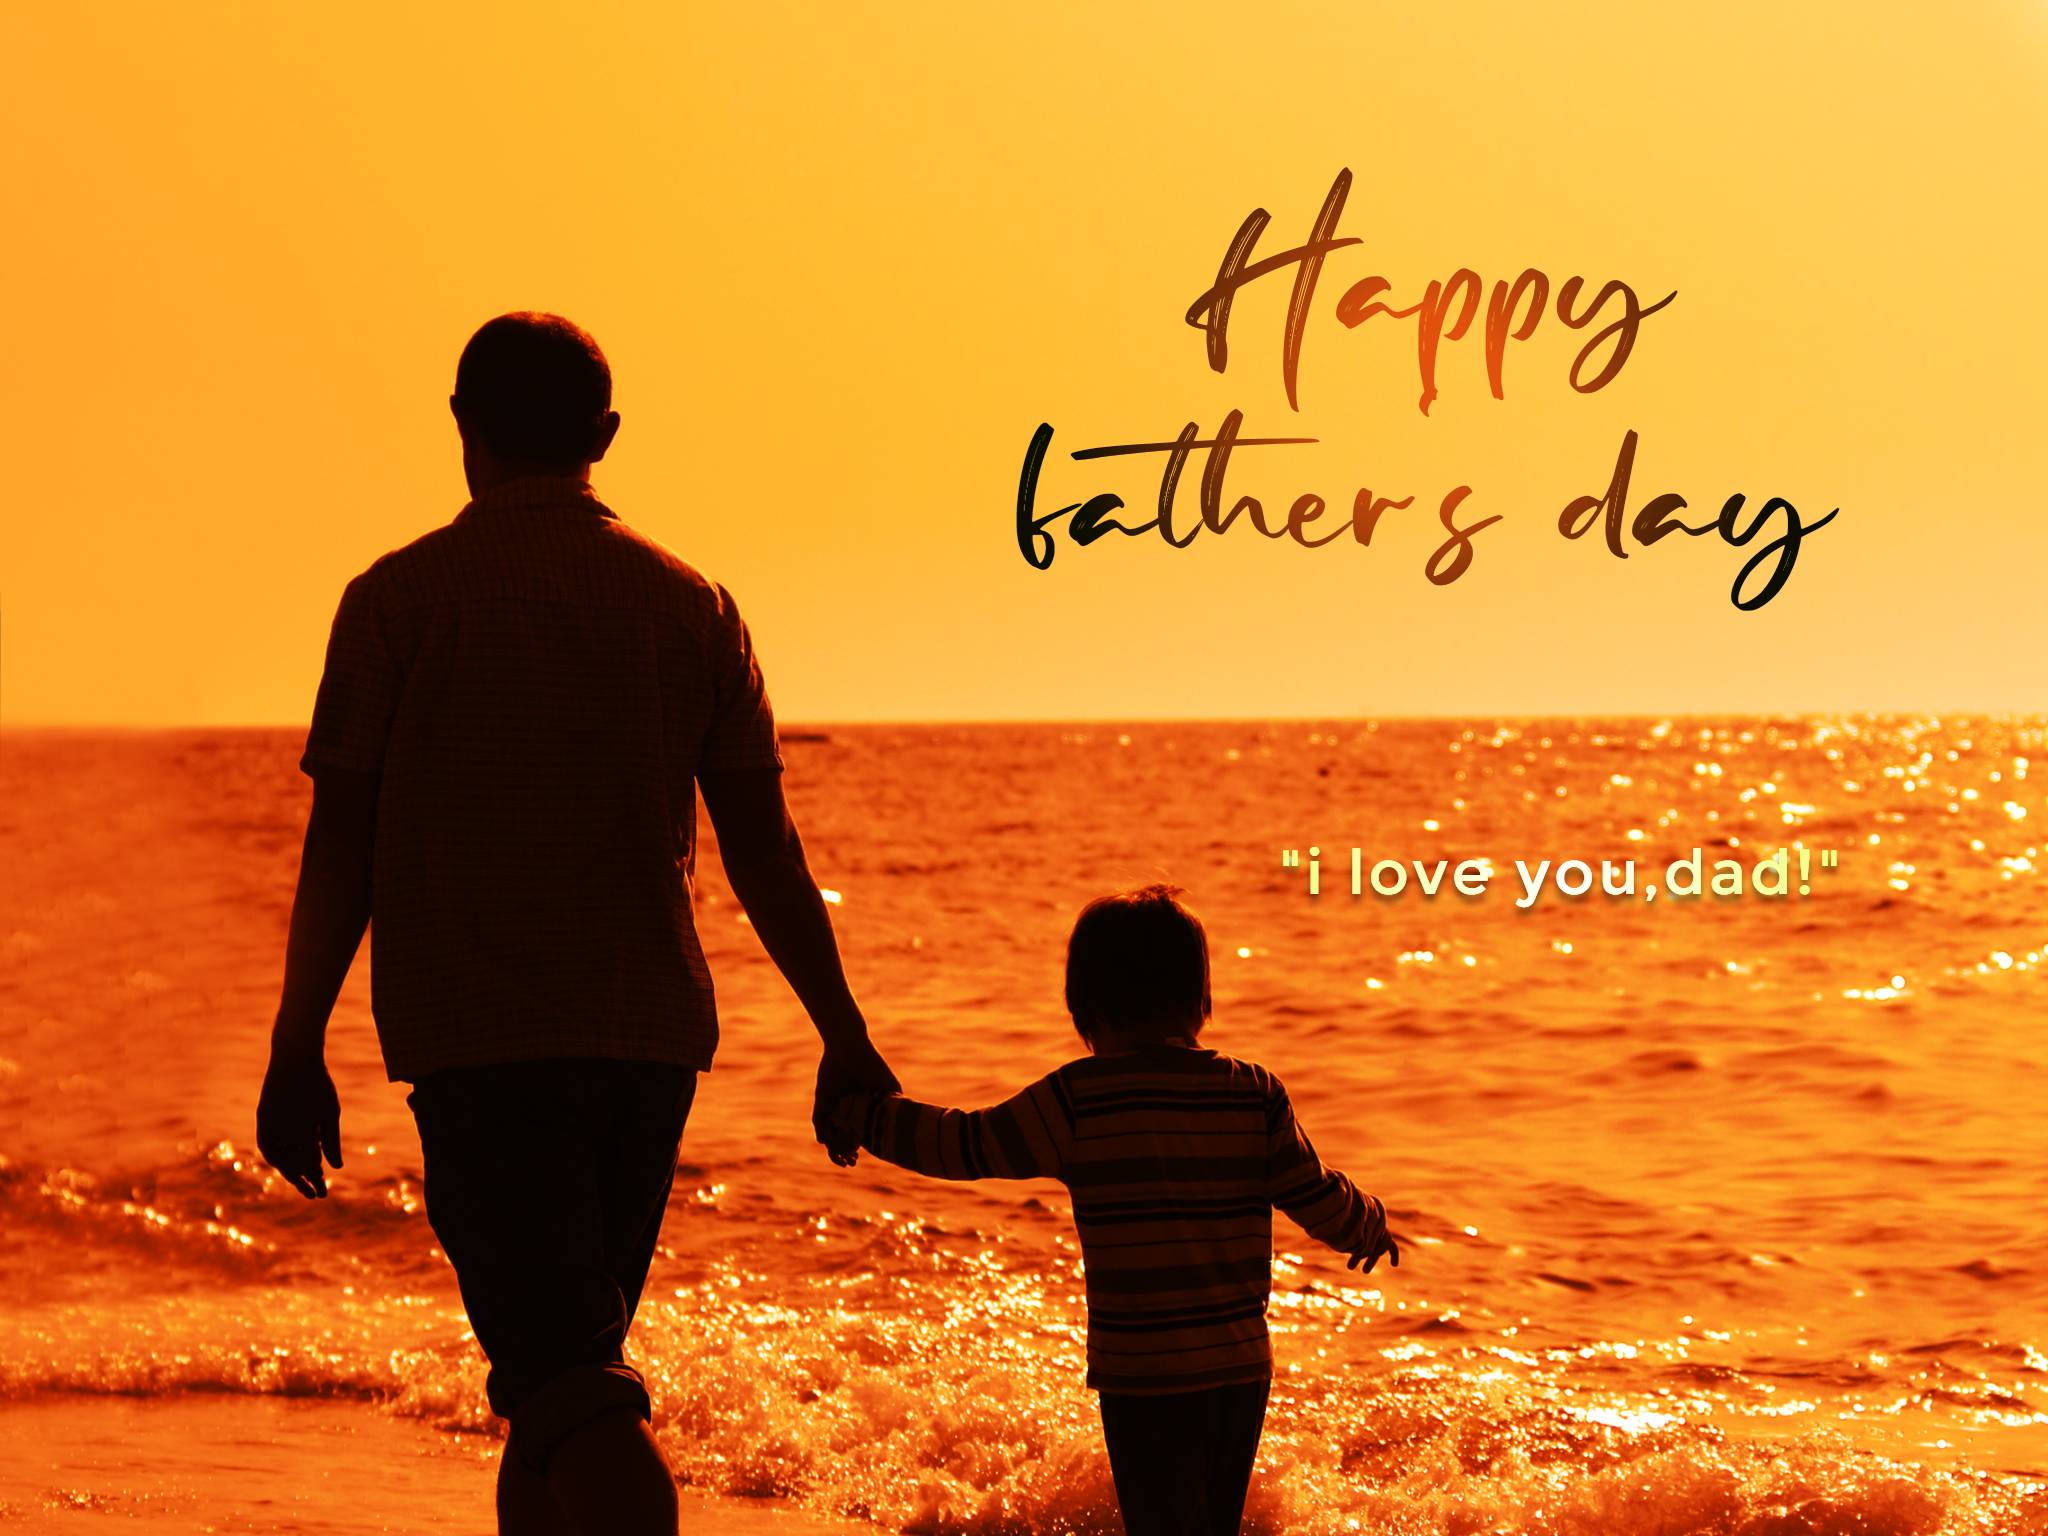 heartfelt fathers day message card template of a man hold a kid on the beach